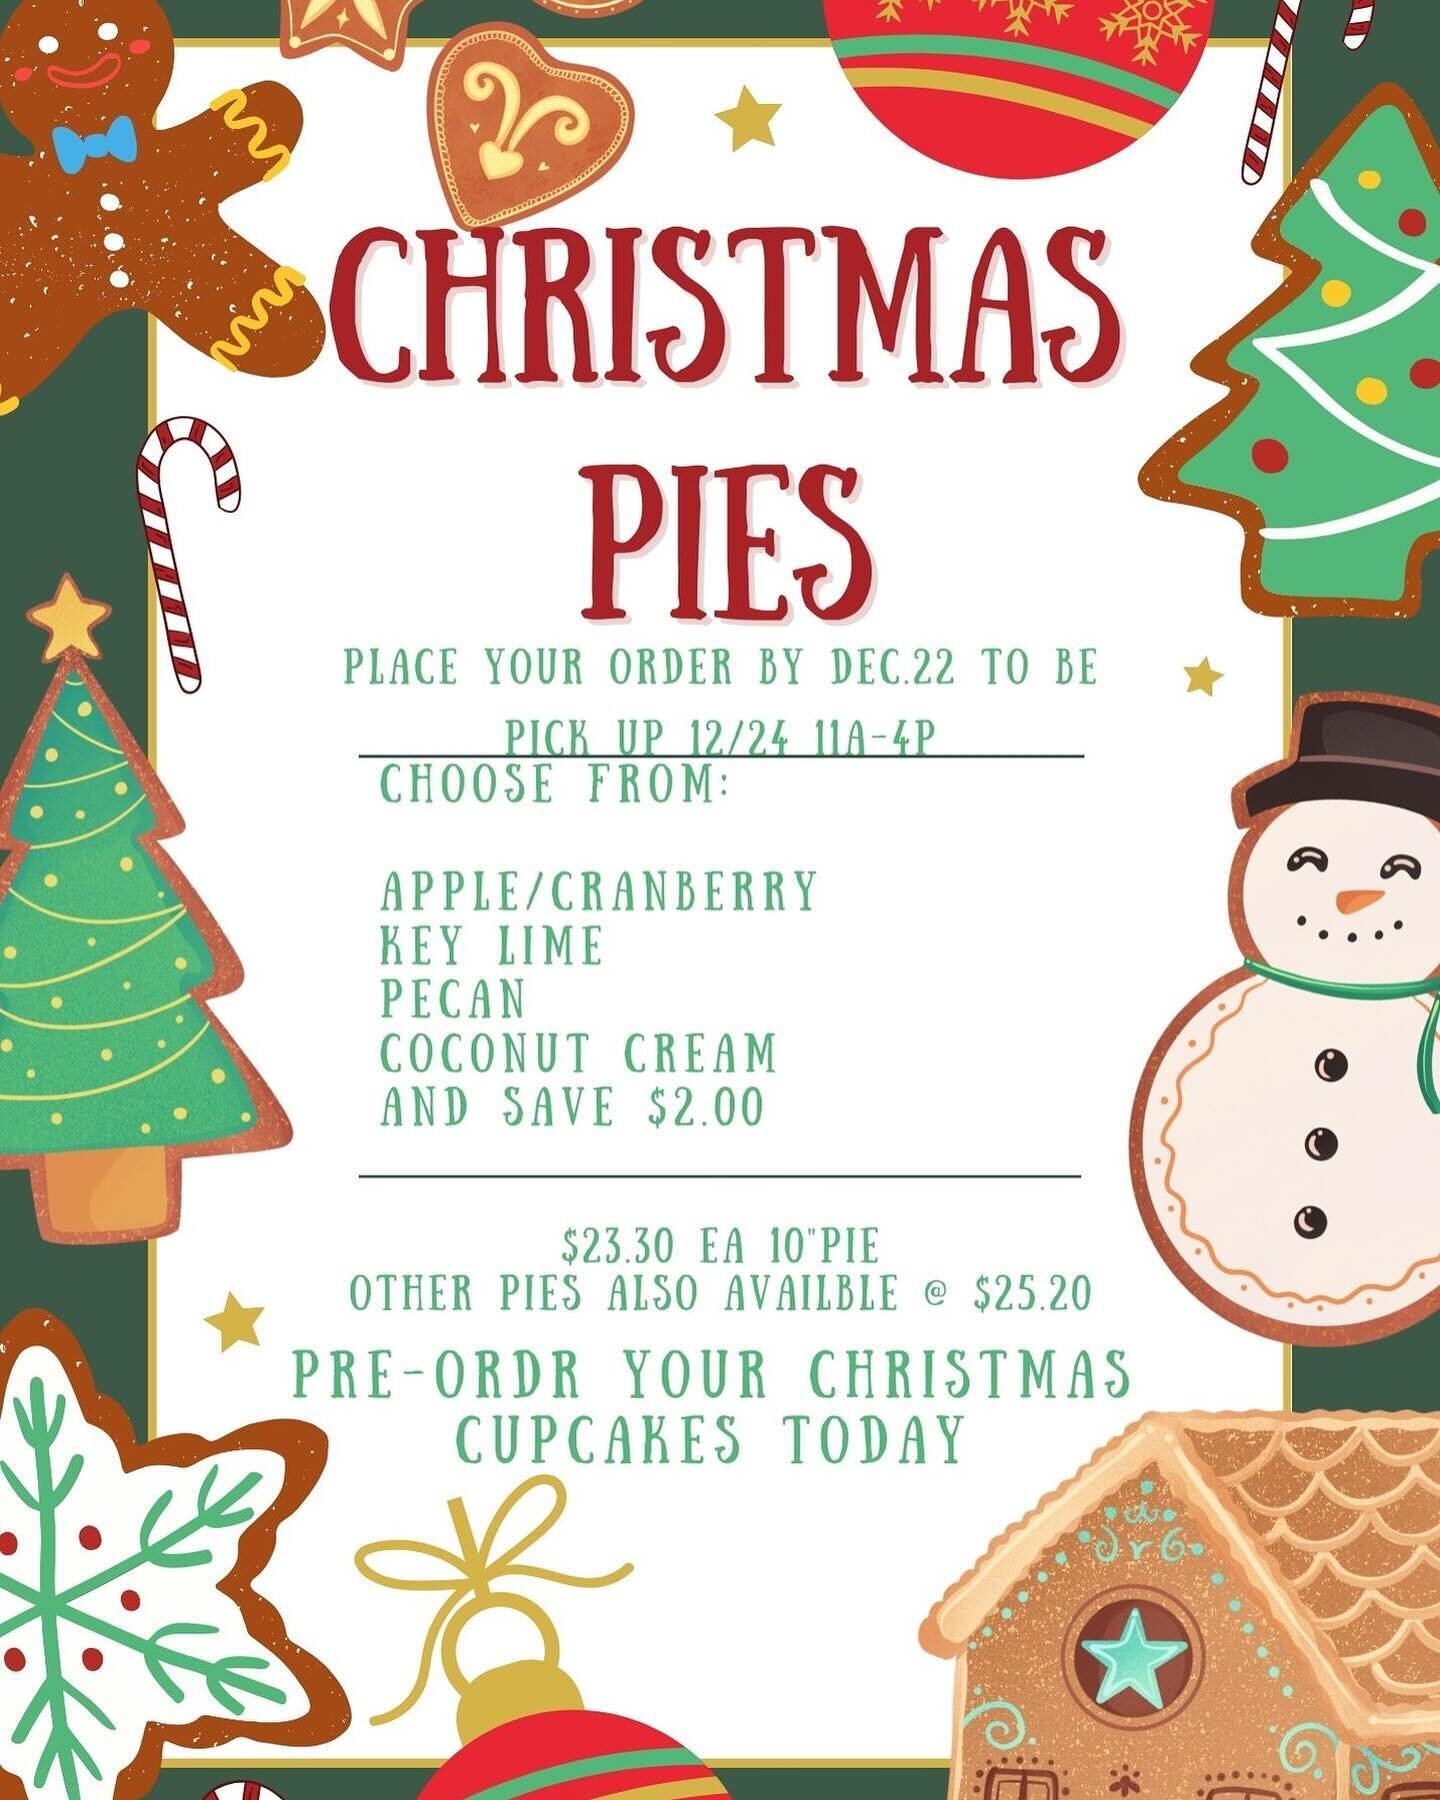 It&rsquo;s time to start thinking about #PIE What ones should you order for Holiday dinner? These are 4 specials.  But we can make any kind you desire.